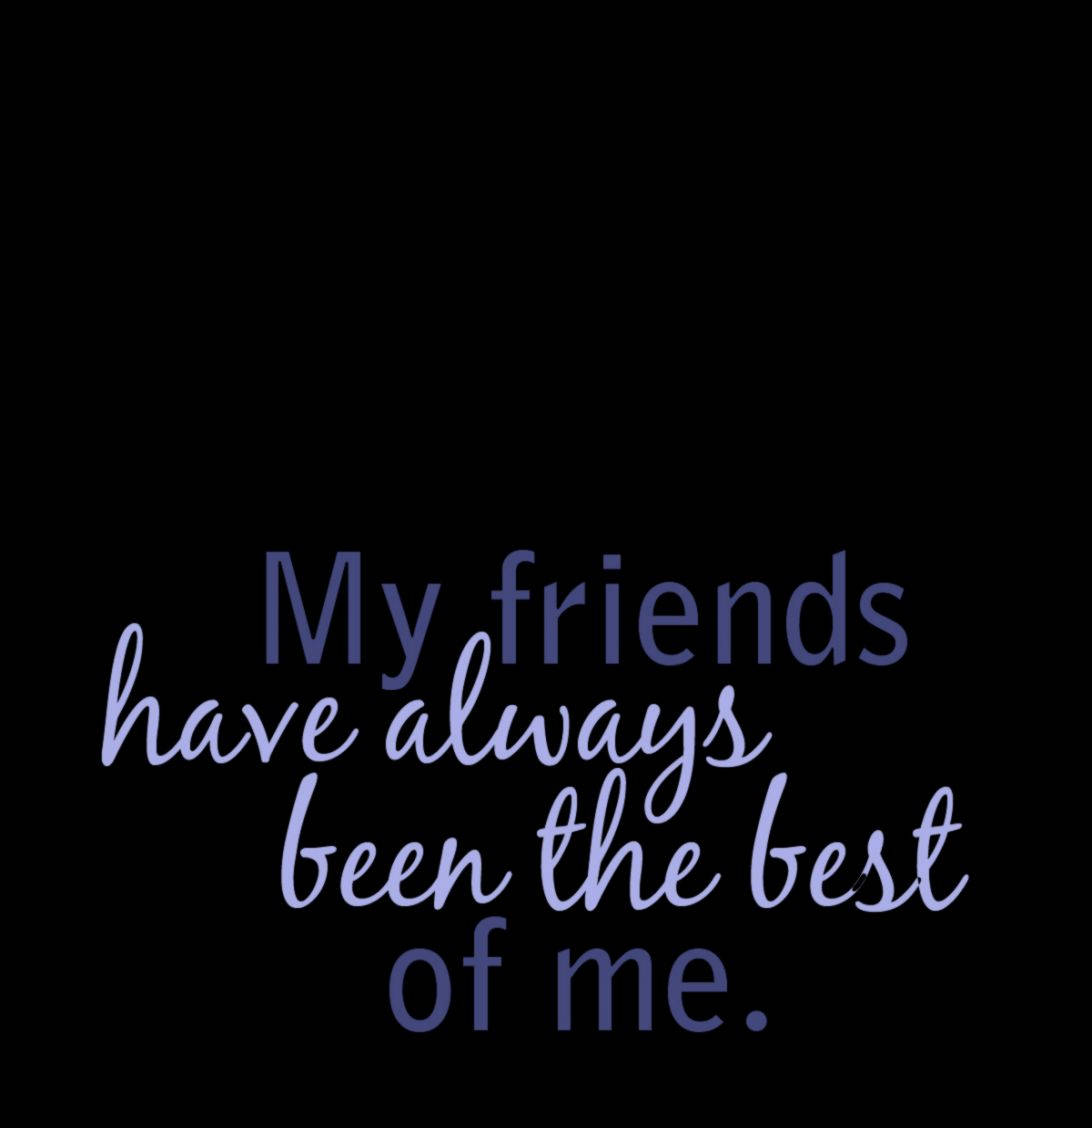 Best Friend Quotes On Black Background Wallpaper